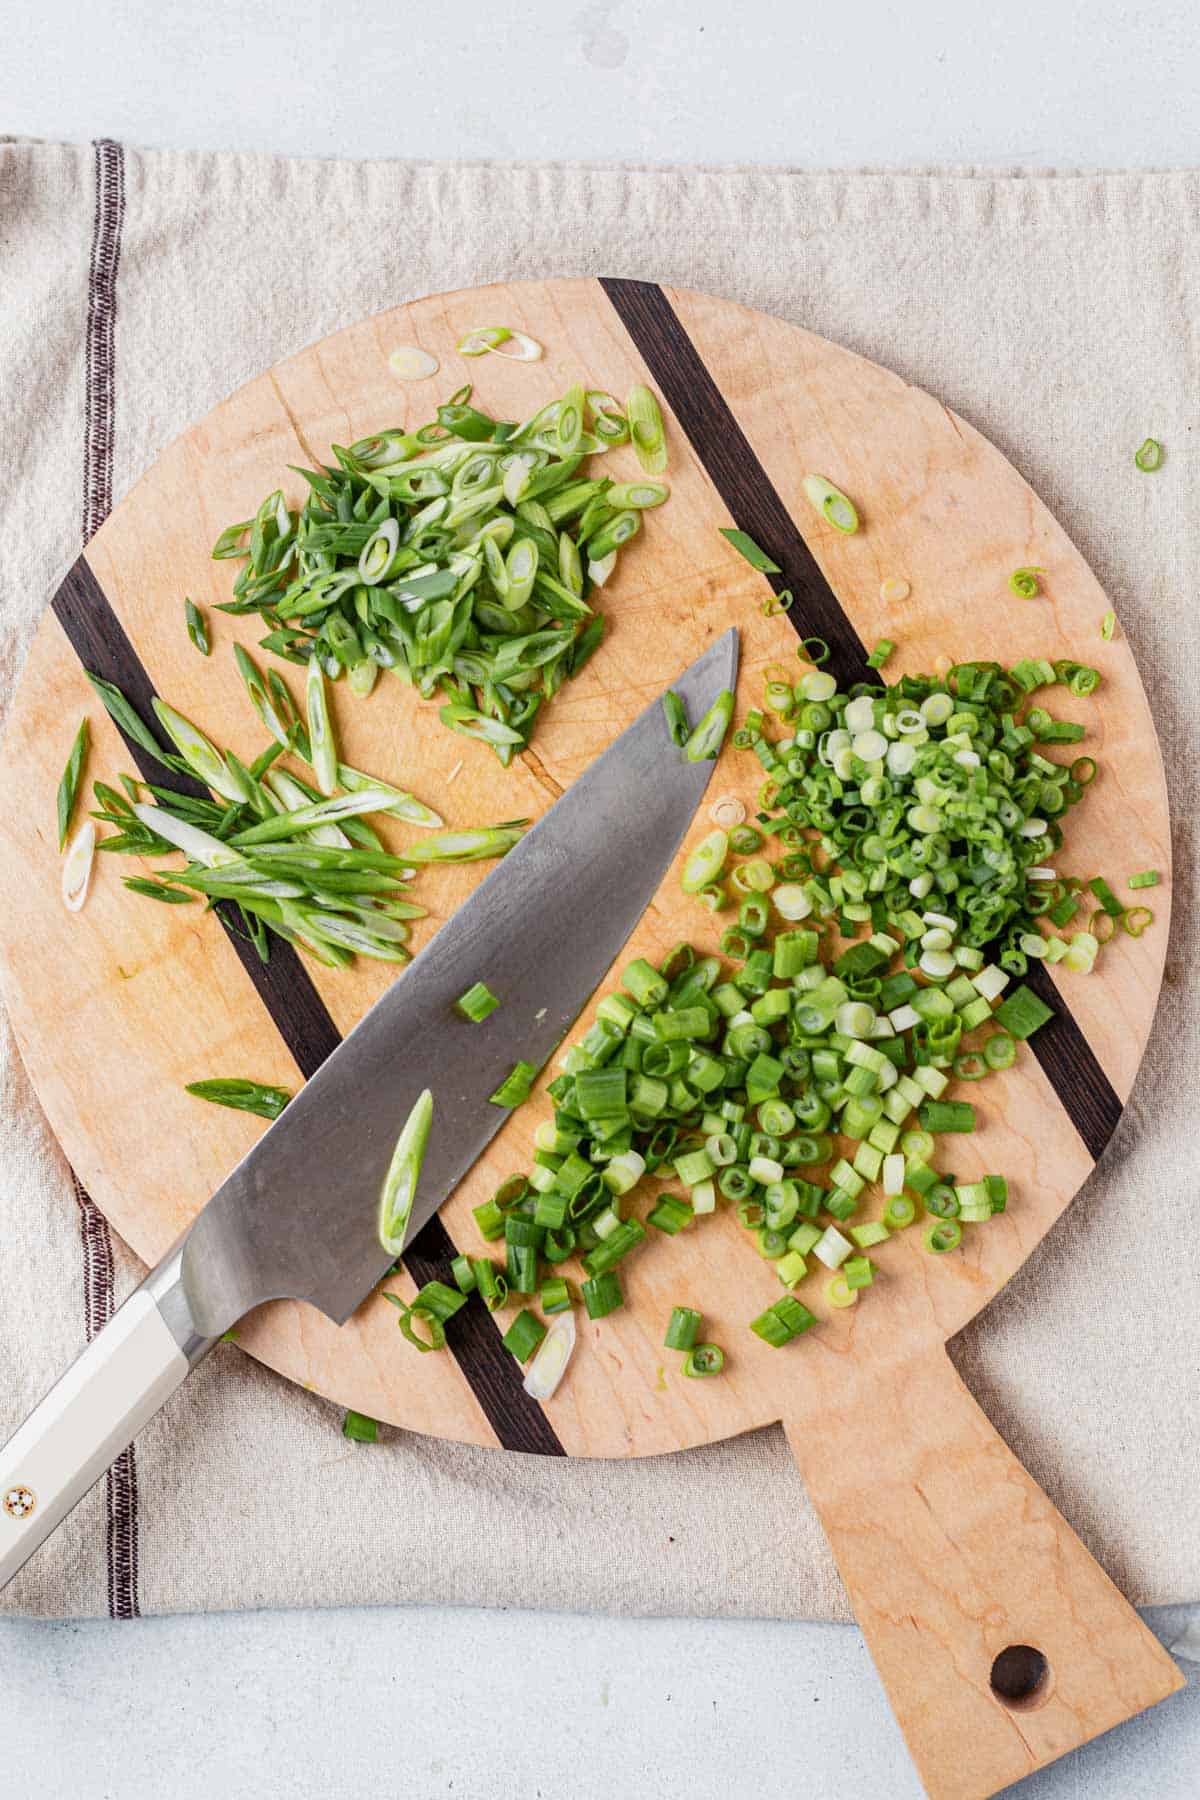 slice green onions on a cutting board with a knife